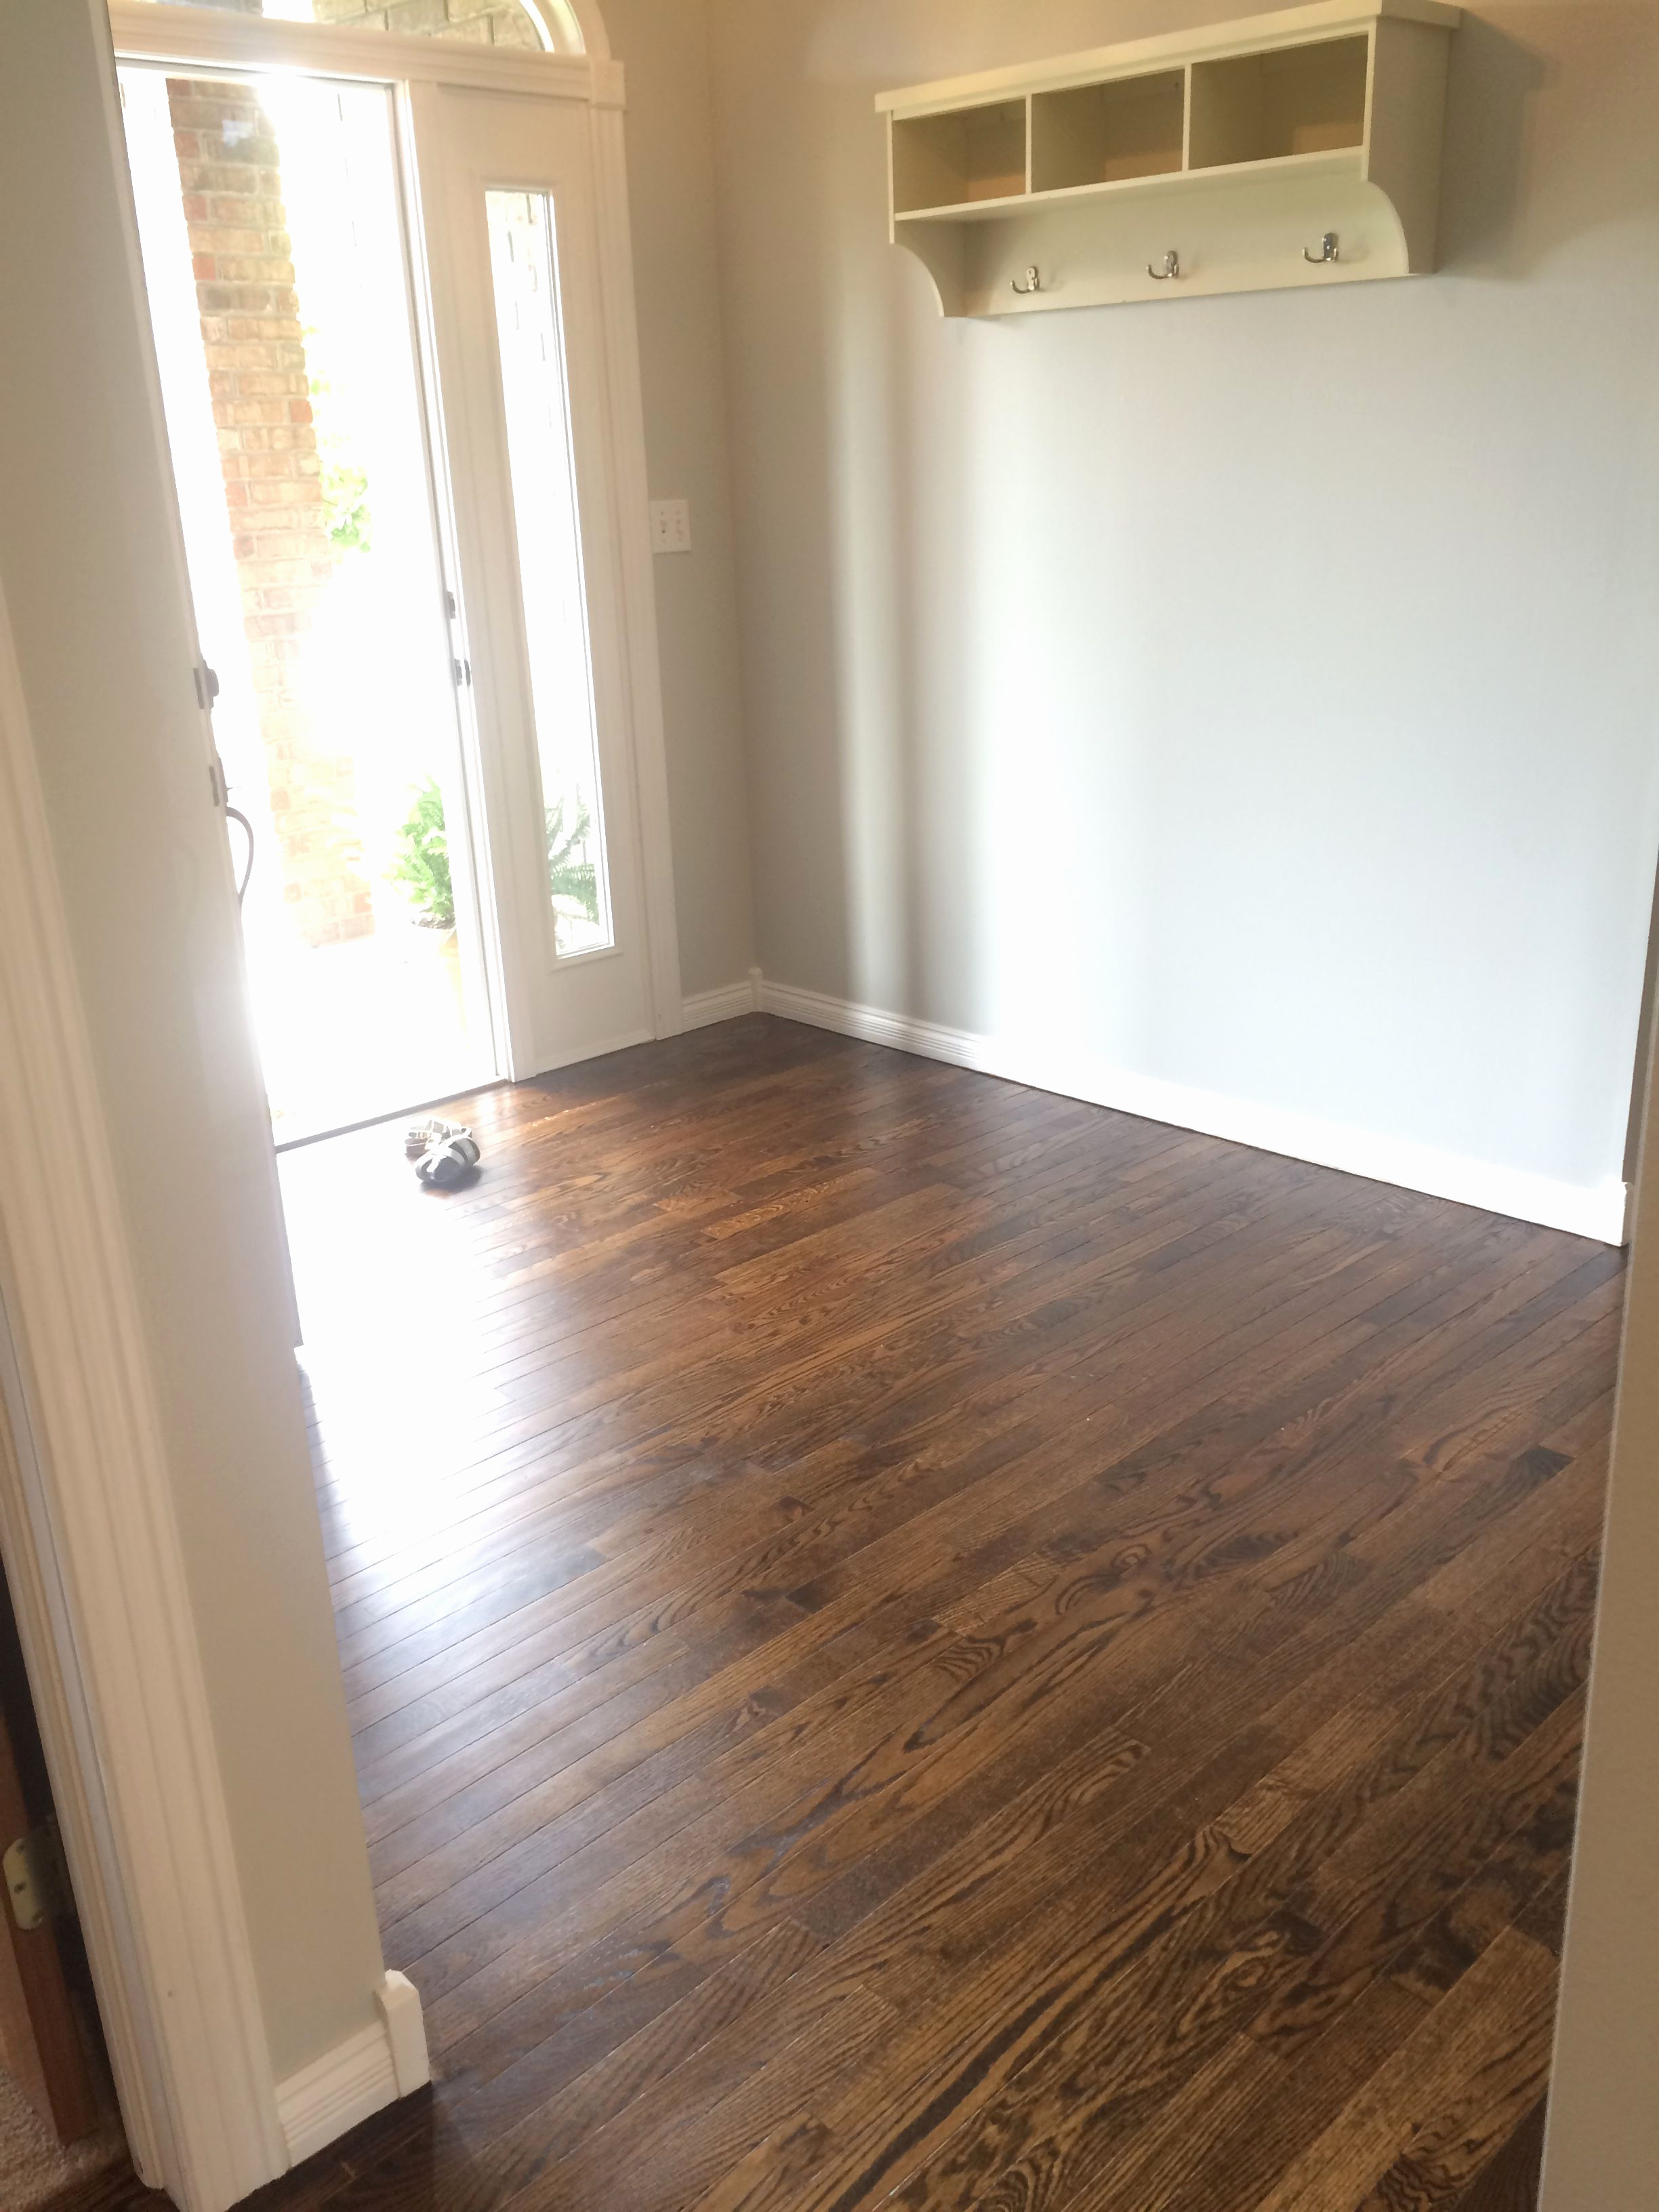 how to refinish engineered hardwood floors yourself of diy refinish hardwood floors 50 best refinished hardwood floors throughout diy refinish hardwood floors 50 best refinished hardwood floors before and after graphics 50